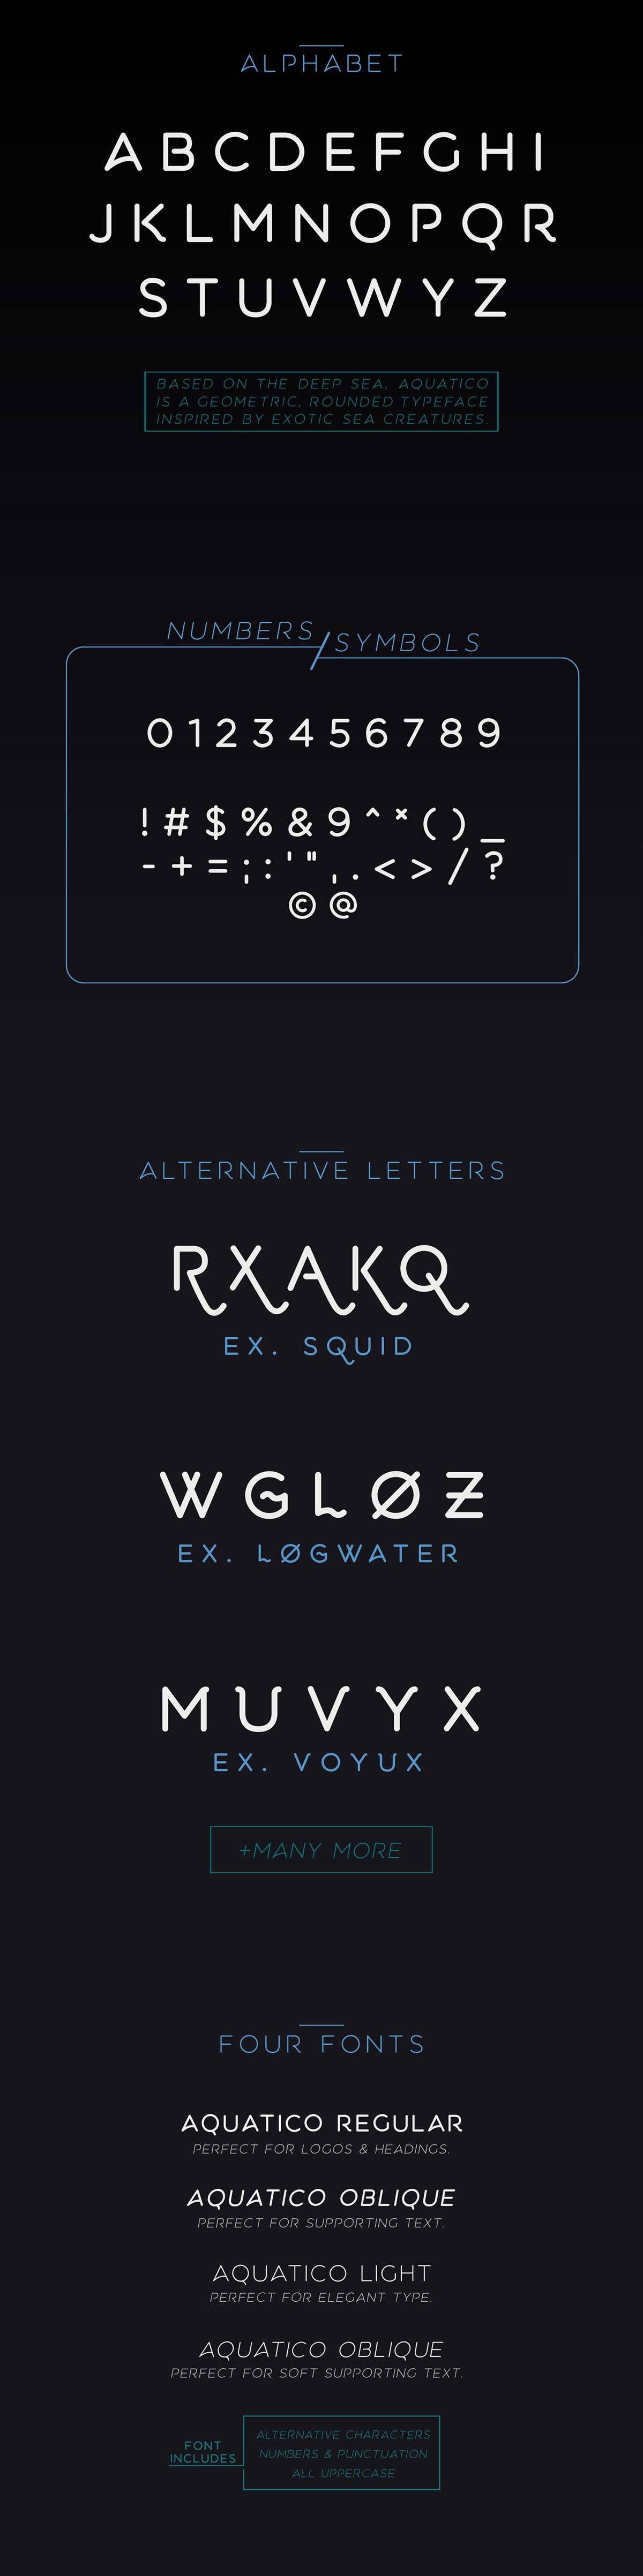 Aquatico Font designed by Andrew Herndon